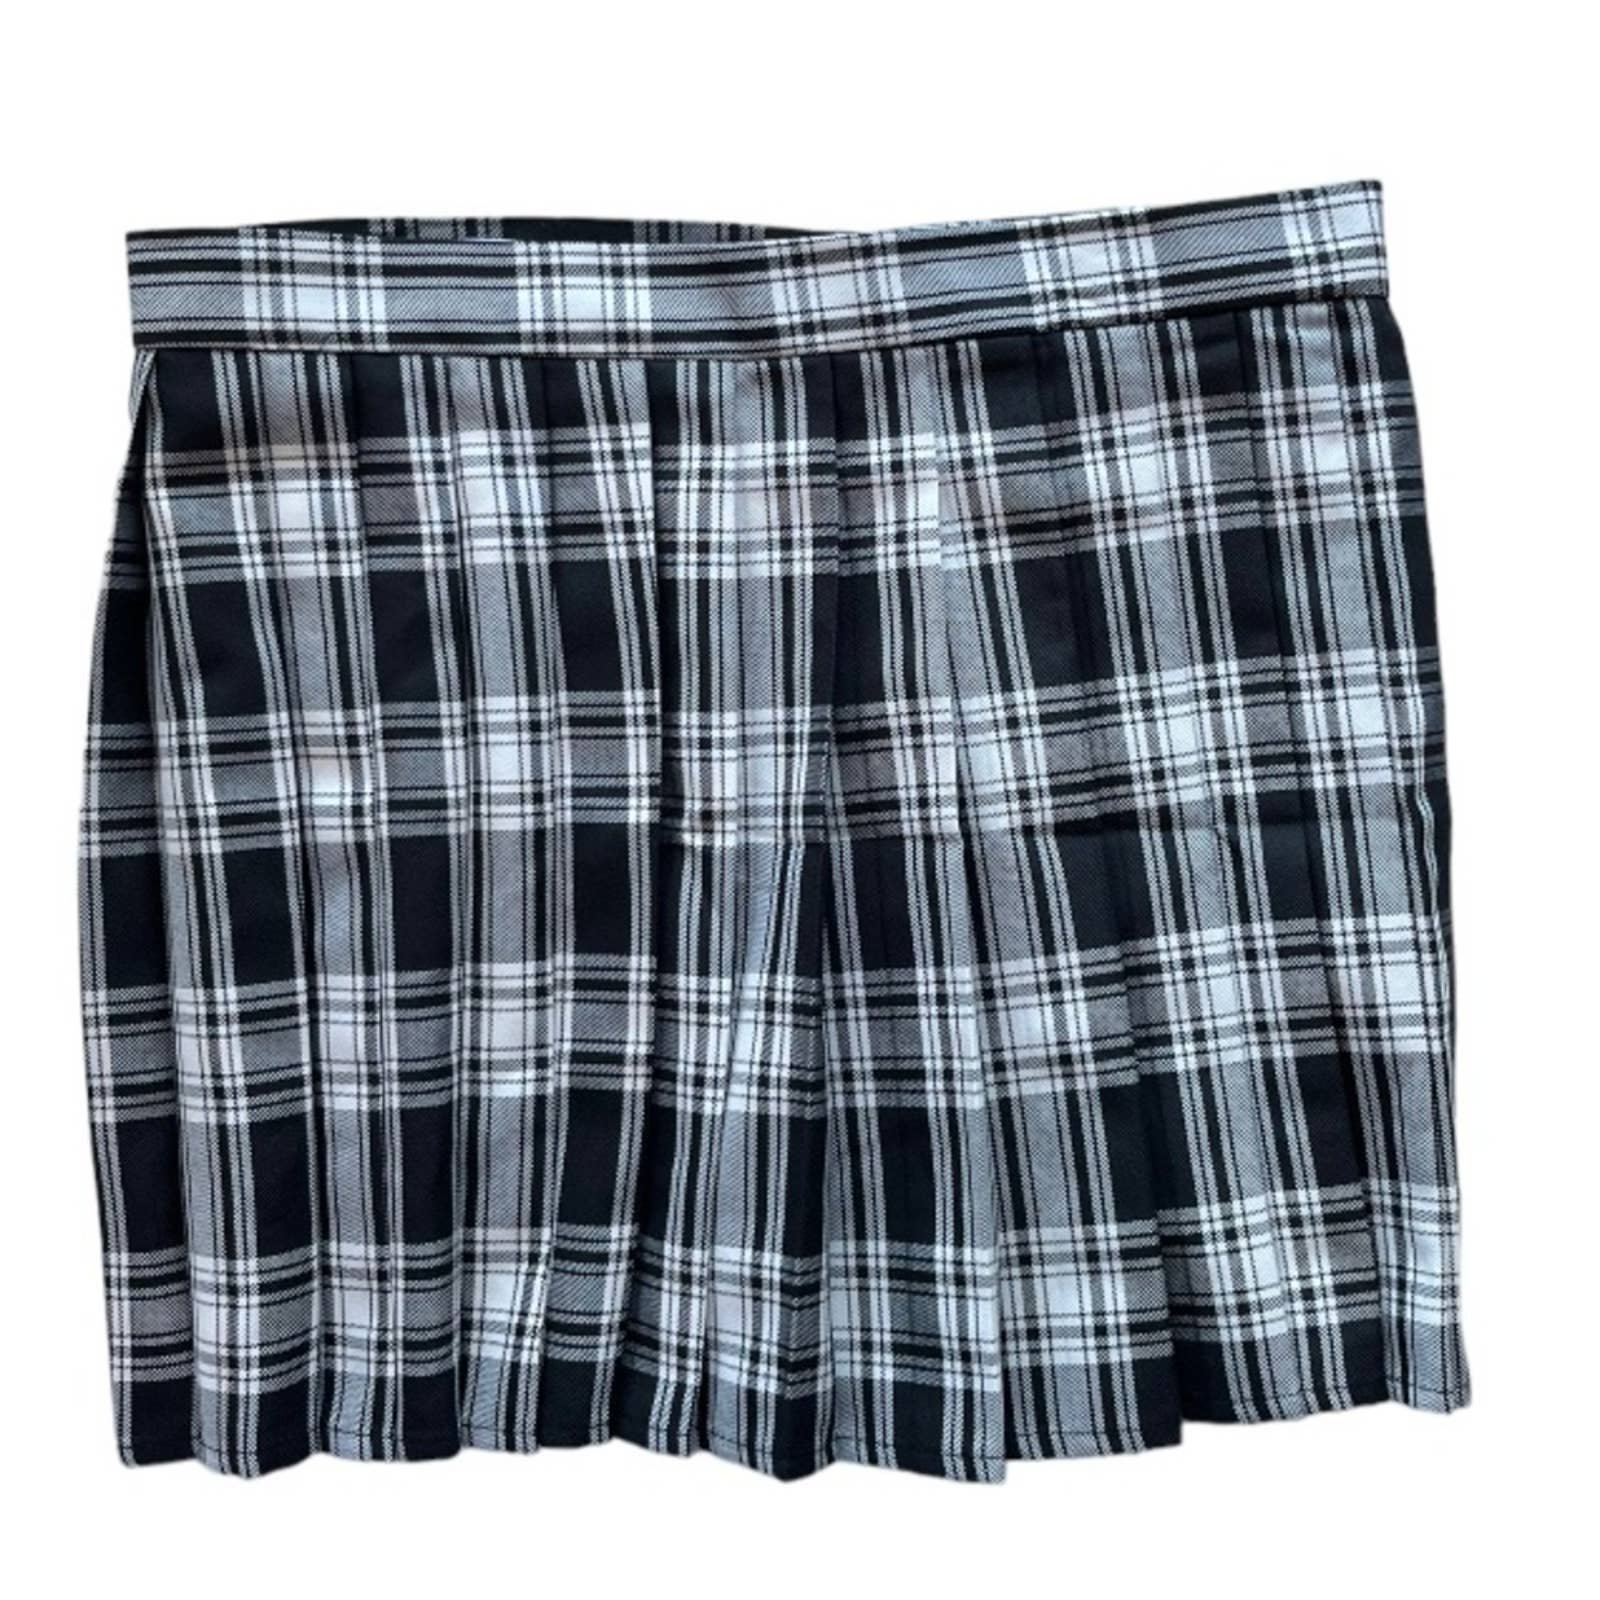 Cheap Mini Skirt, Hug Sunshine, Black and White Plaid Pleated Skirt, Y2K pD40QYmgS outlet online shop